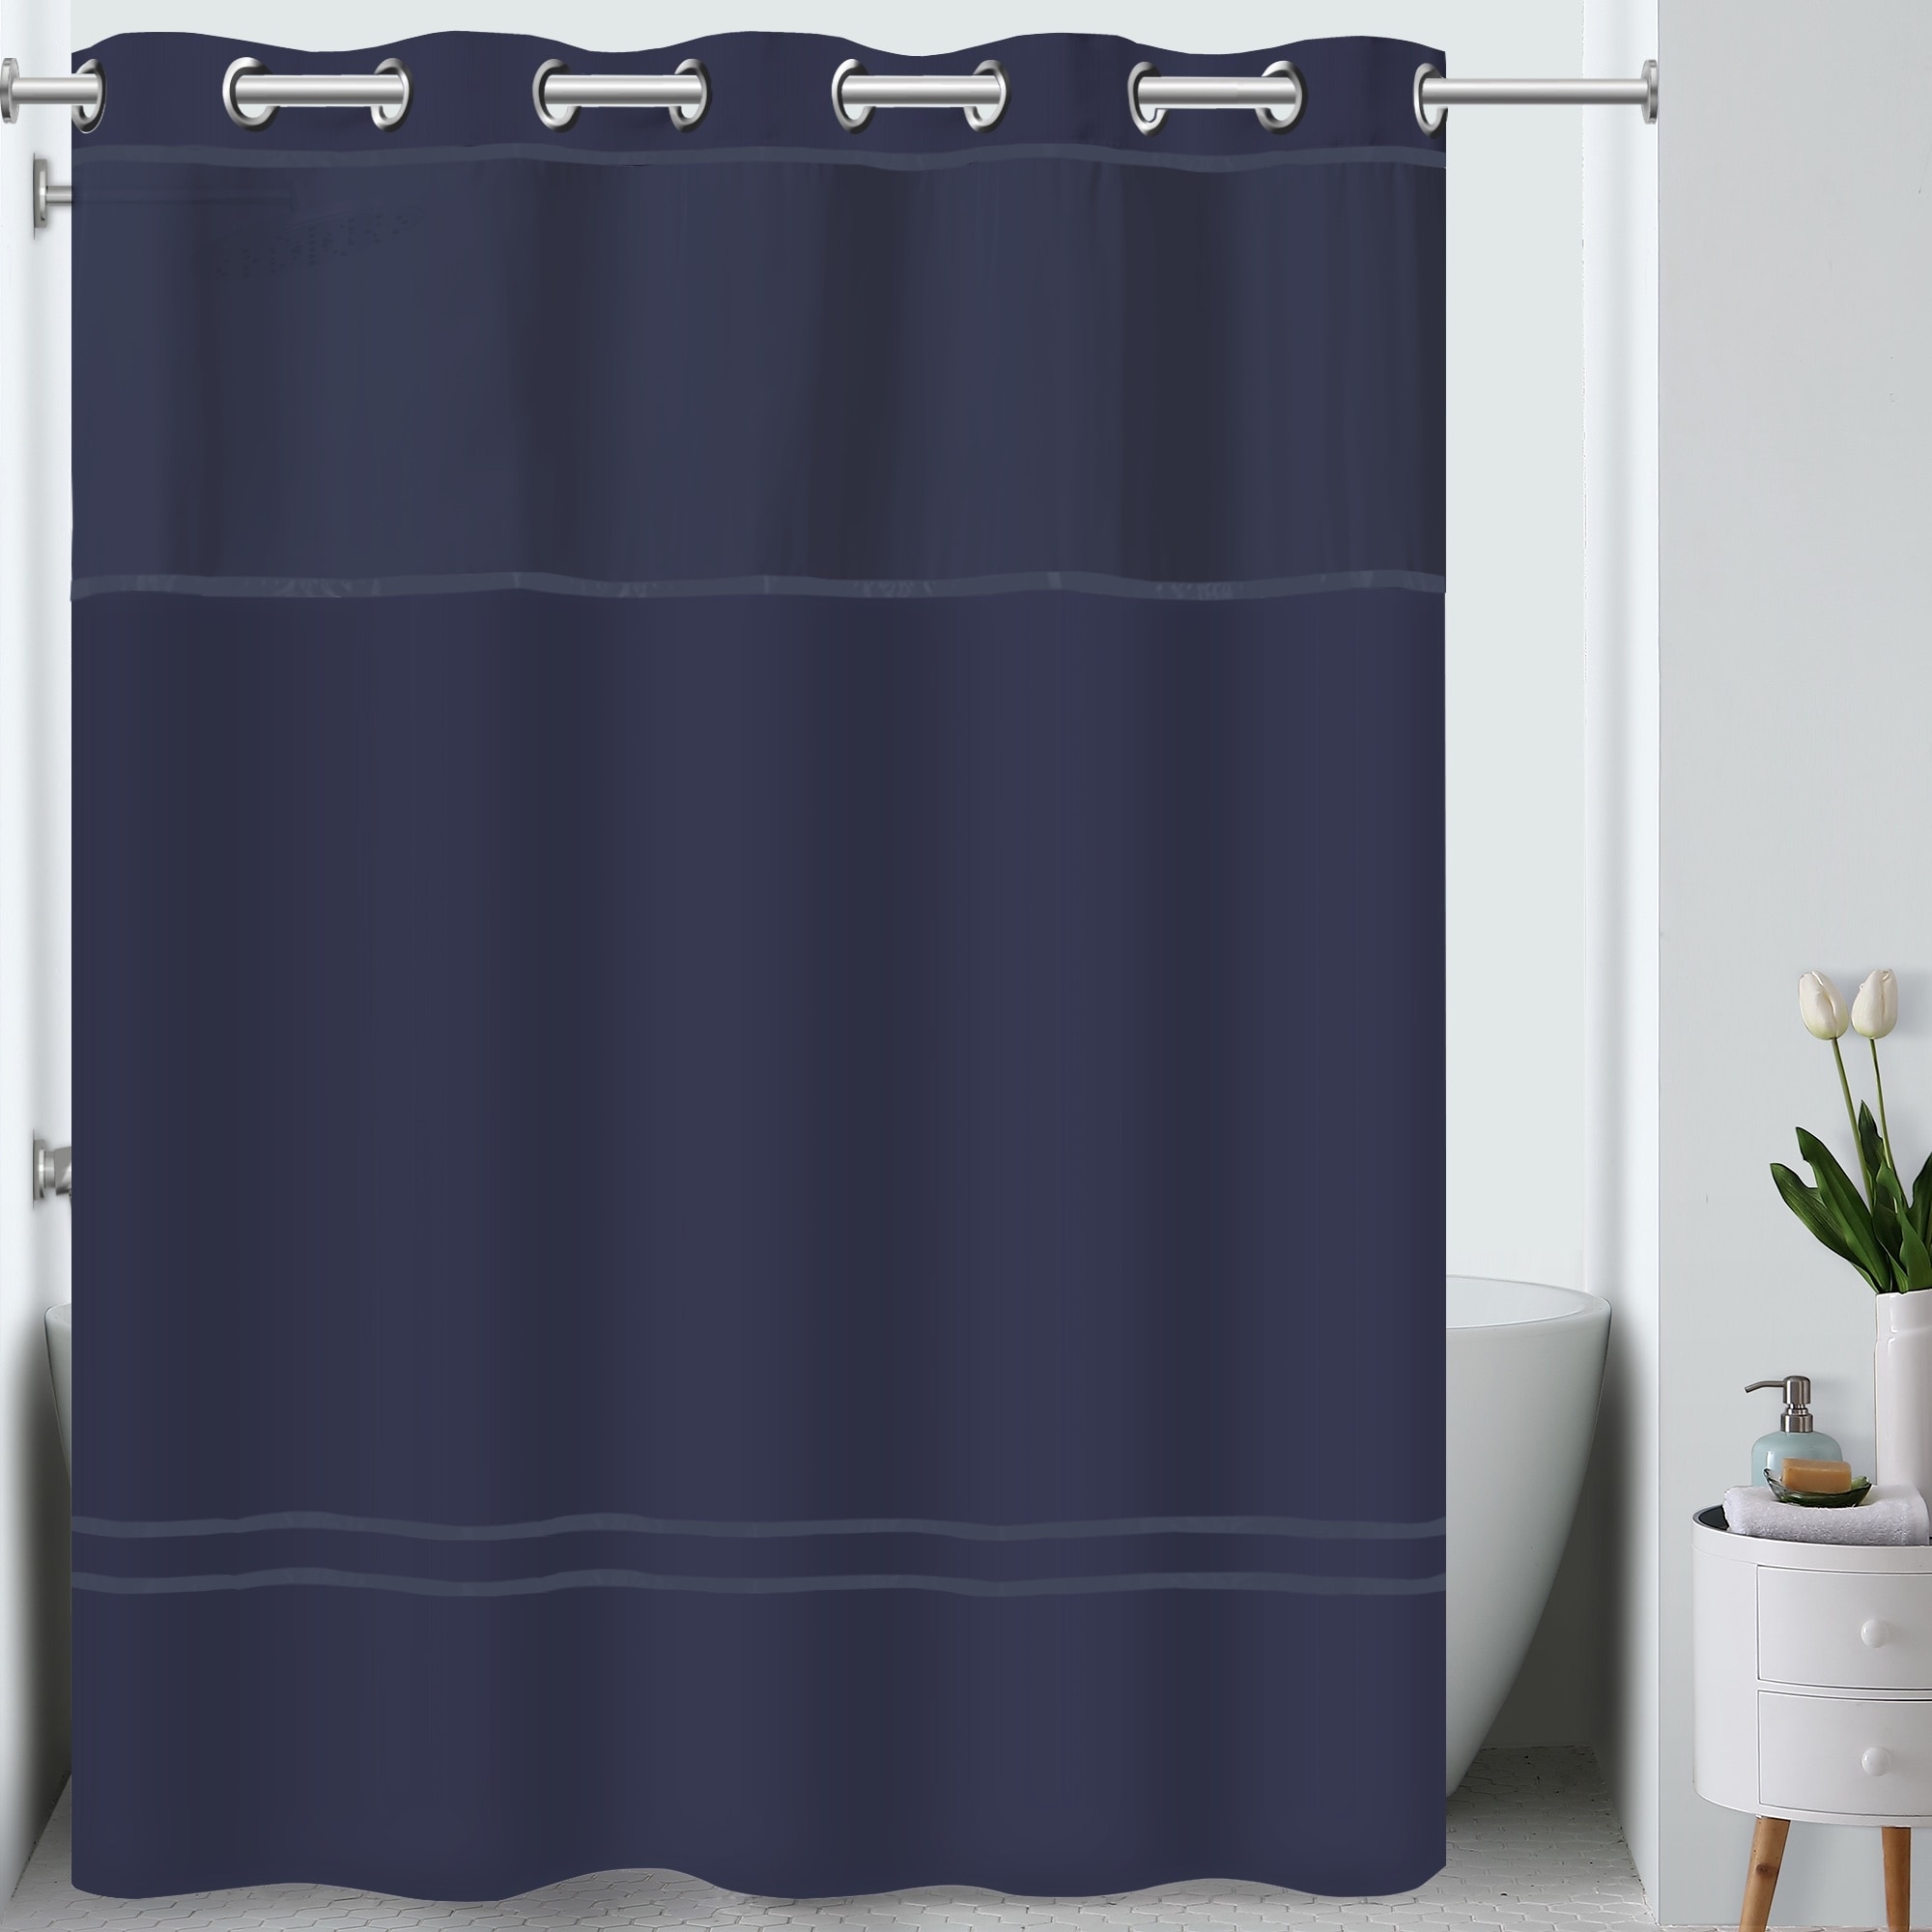 Hookless Escape 3-in-1 Shower Curtain with Sheer Top Window, Flex